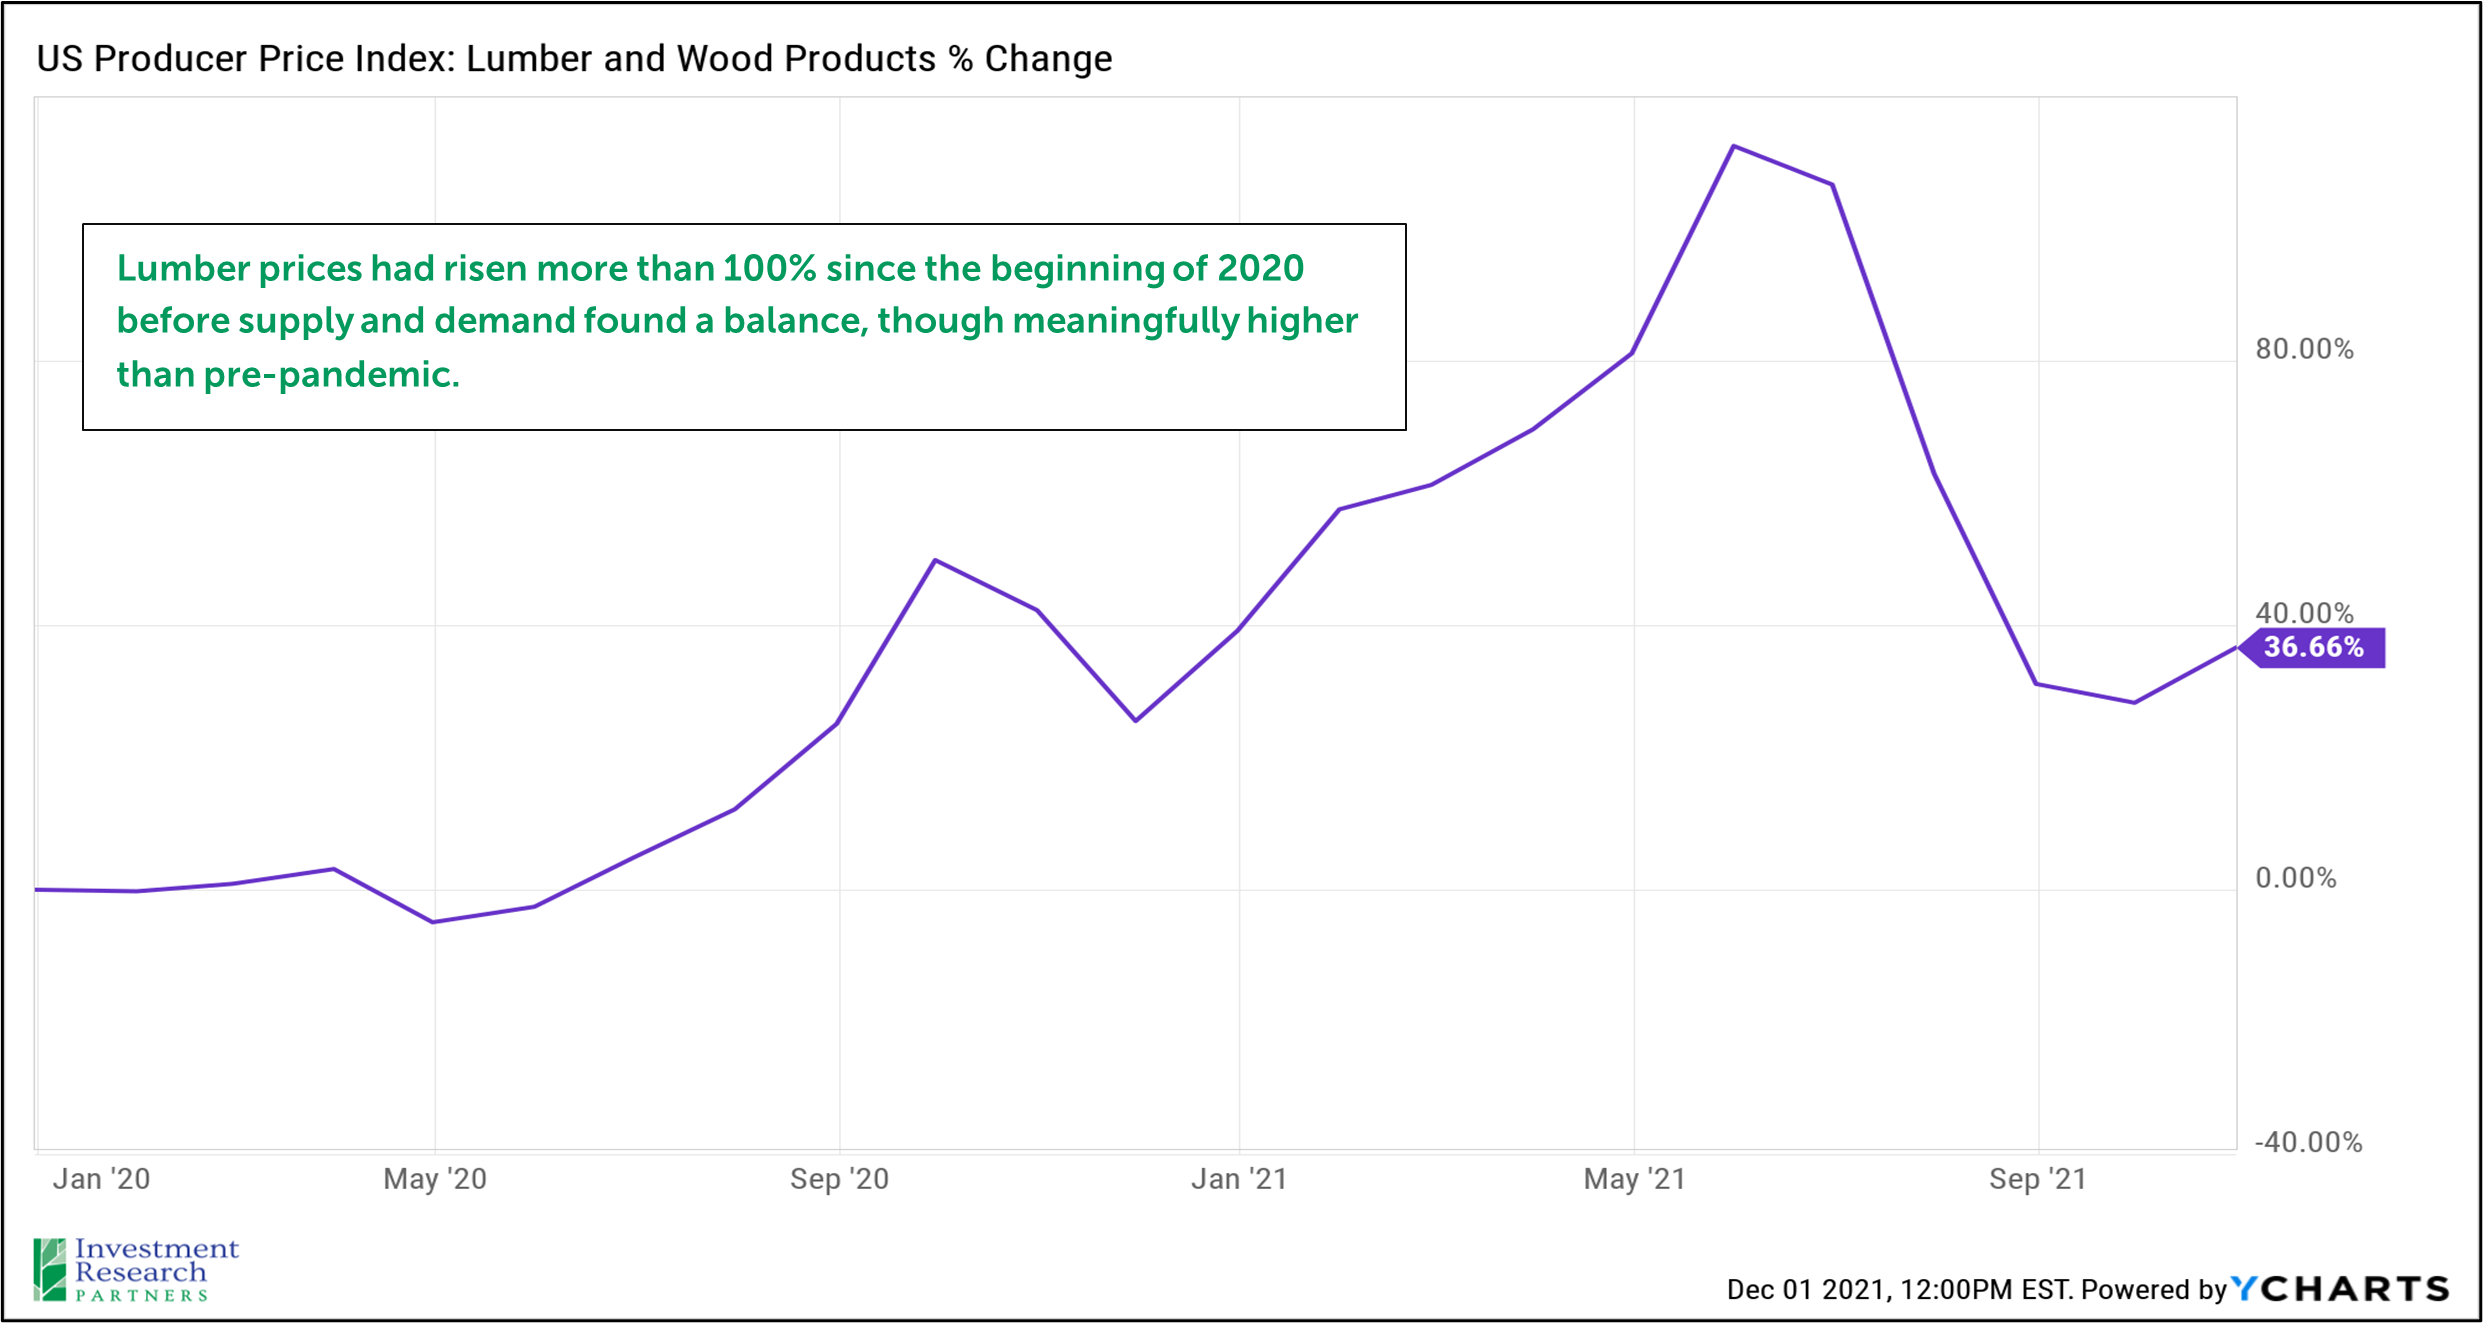 Line graph depicting US Producer Price Index: Lumber and Wood Products % Change from January 2020 to September 2021, with text that reads: Lumber prices had risen more than 100% since the beginning of 2020 before supply and demand found a balance, though meaningfully higher than pre-pandemic.